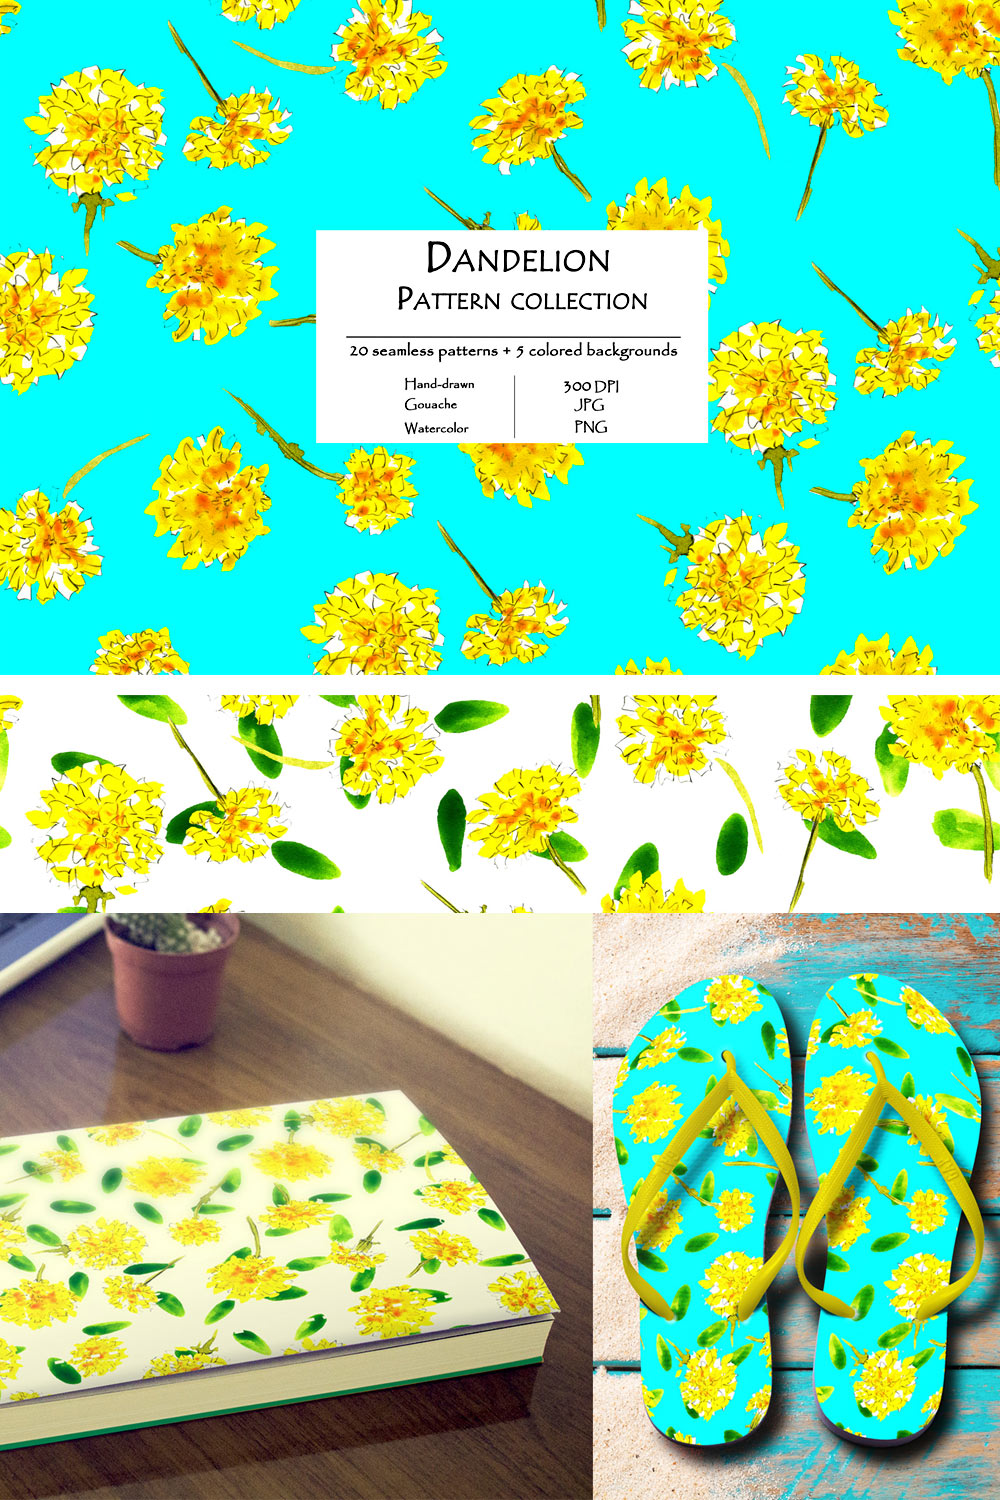 Dandelion Pattern Collection Of 20 Seamless Patterns And 5 Colored Background Pinterest Image.